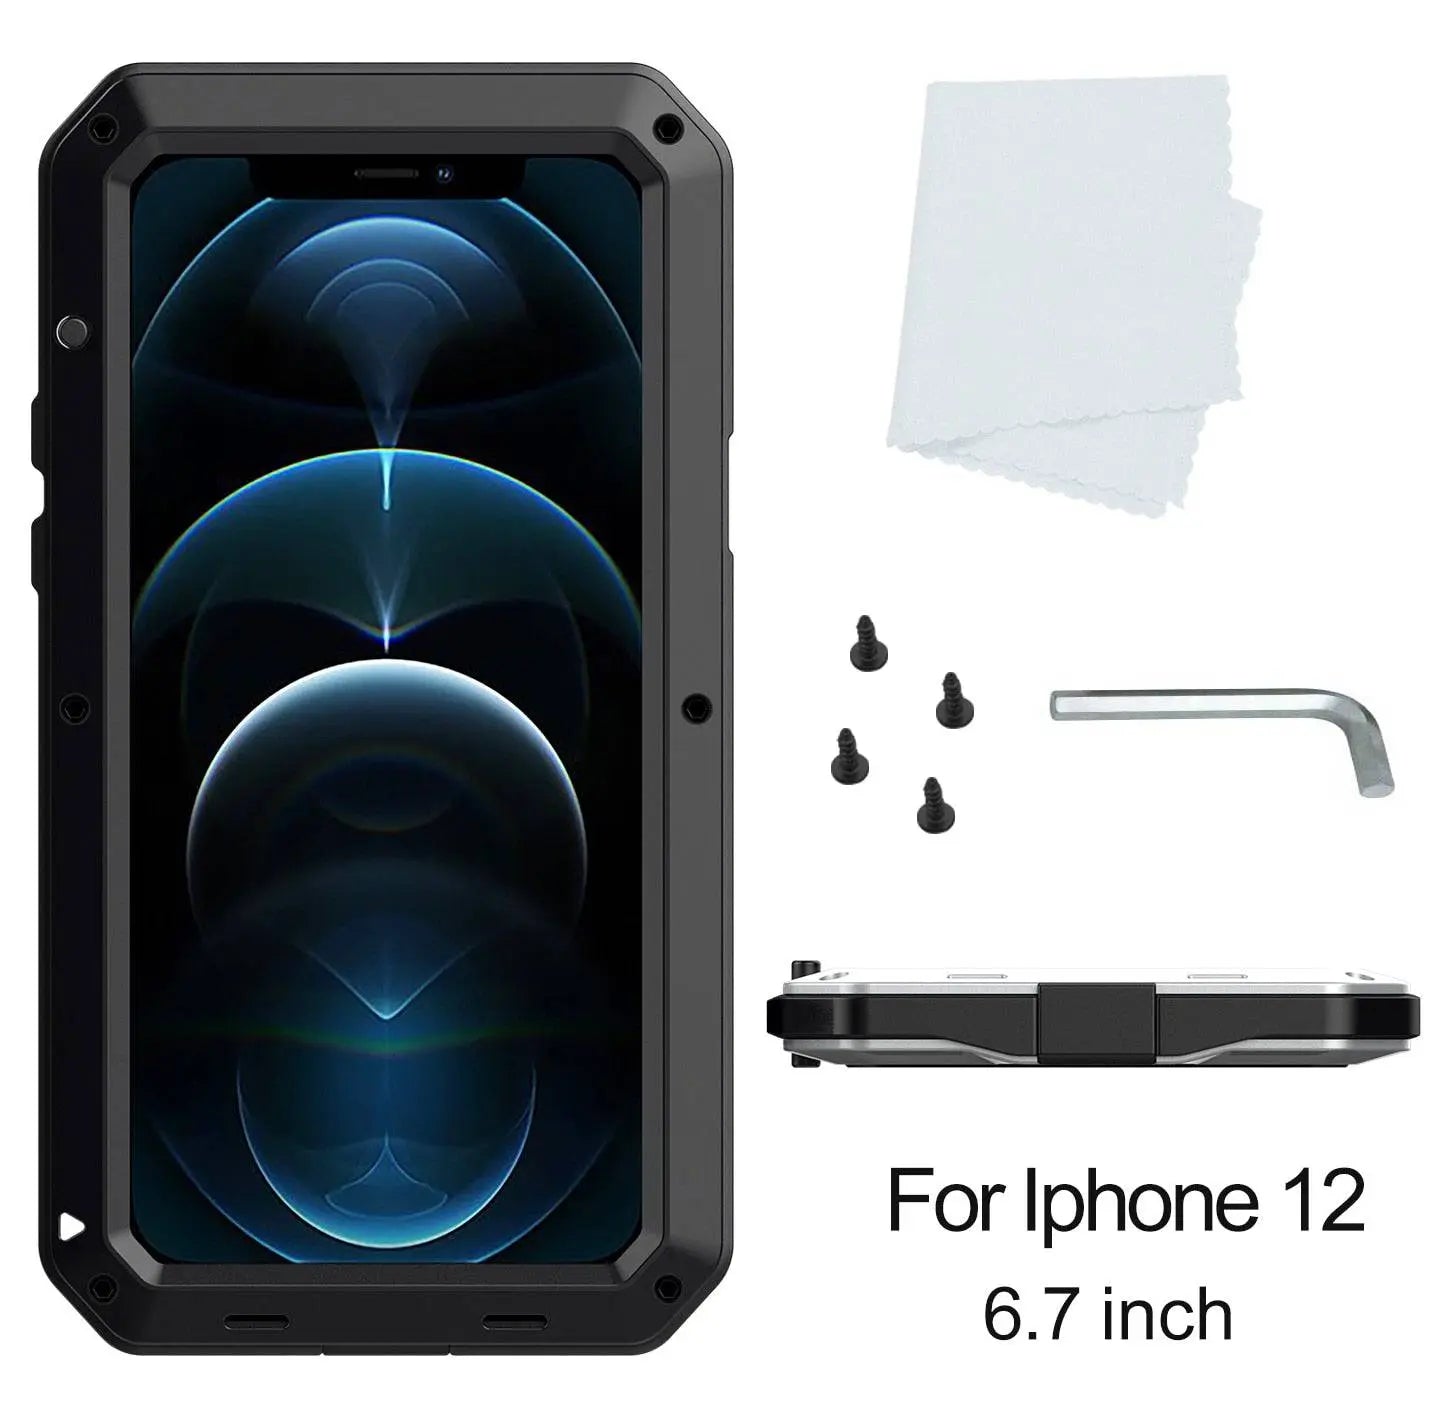 Full Protective Military Grade Kickstand Waterproof Case For iPhone 12 Pro Max Mini - Pinnacle Luxuries